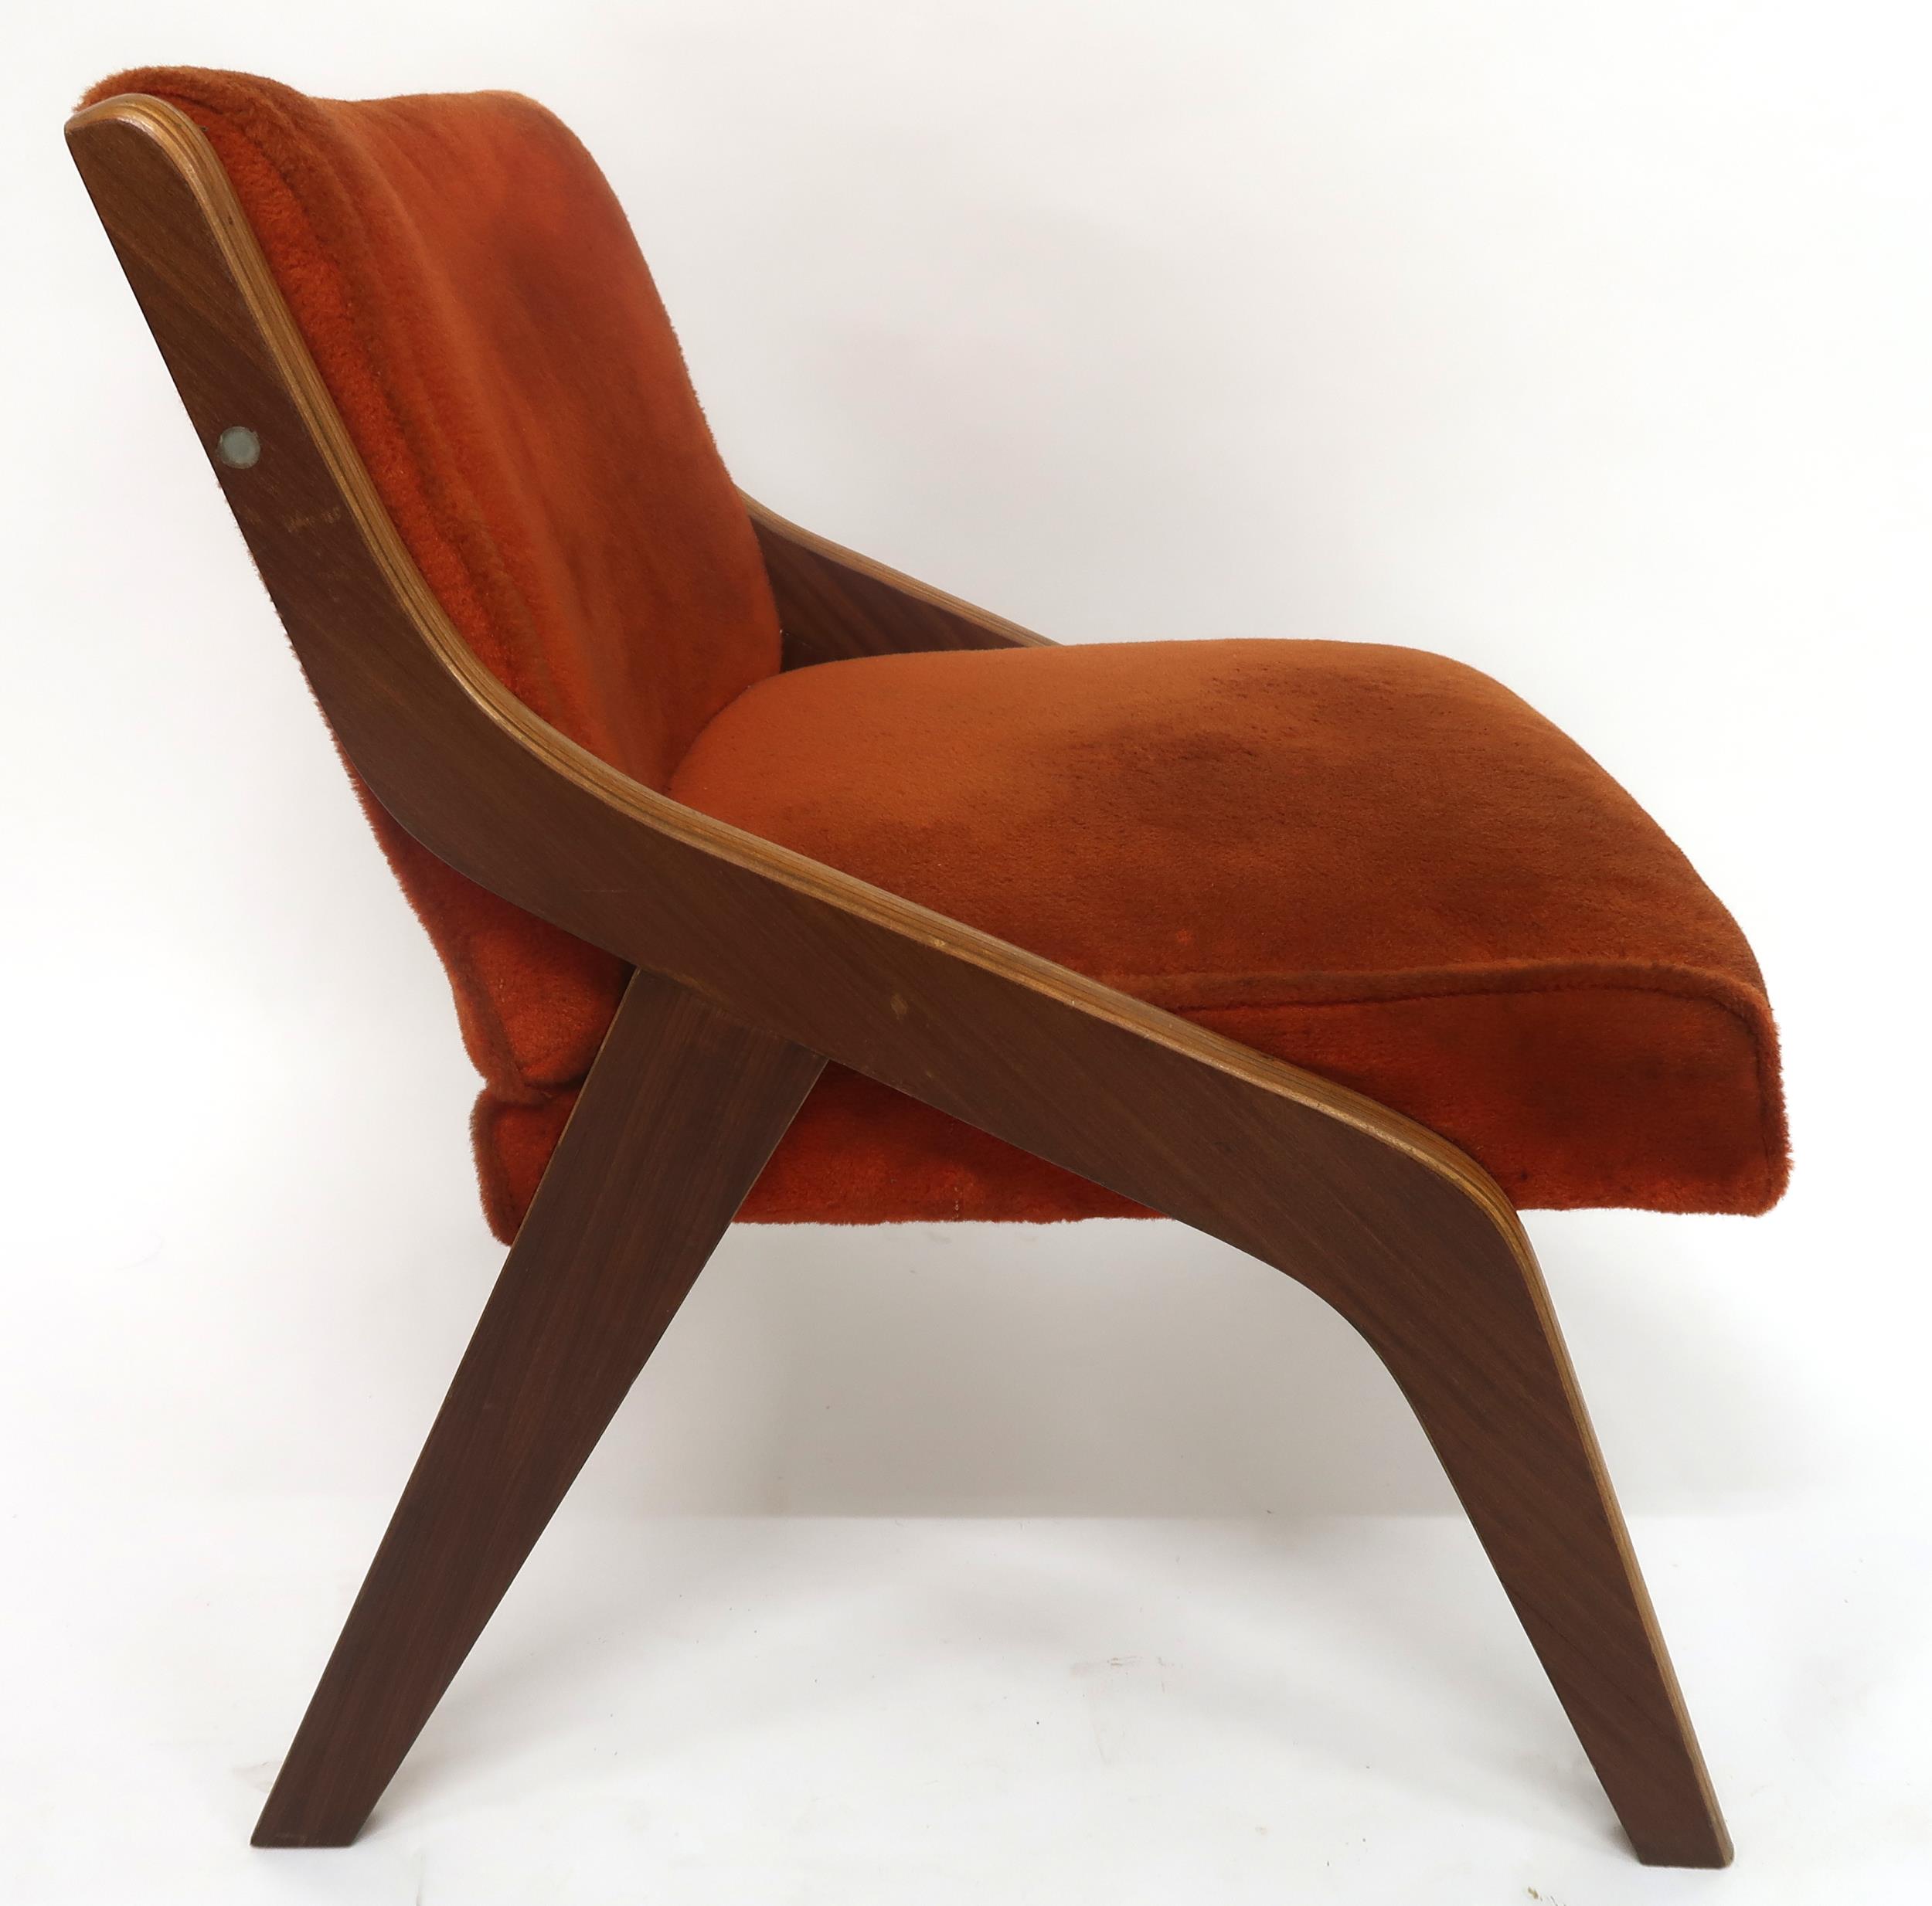 A MID 20TH CENTURY NEIL MORRIS FOR MORRIS OF GLASGOW LOUNGE CHAIR with a laminated Formosa Teak